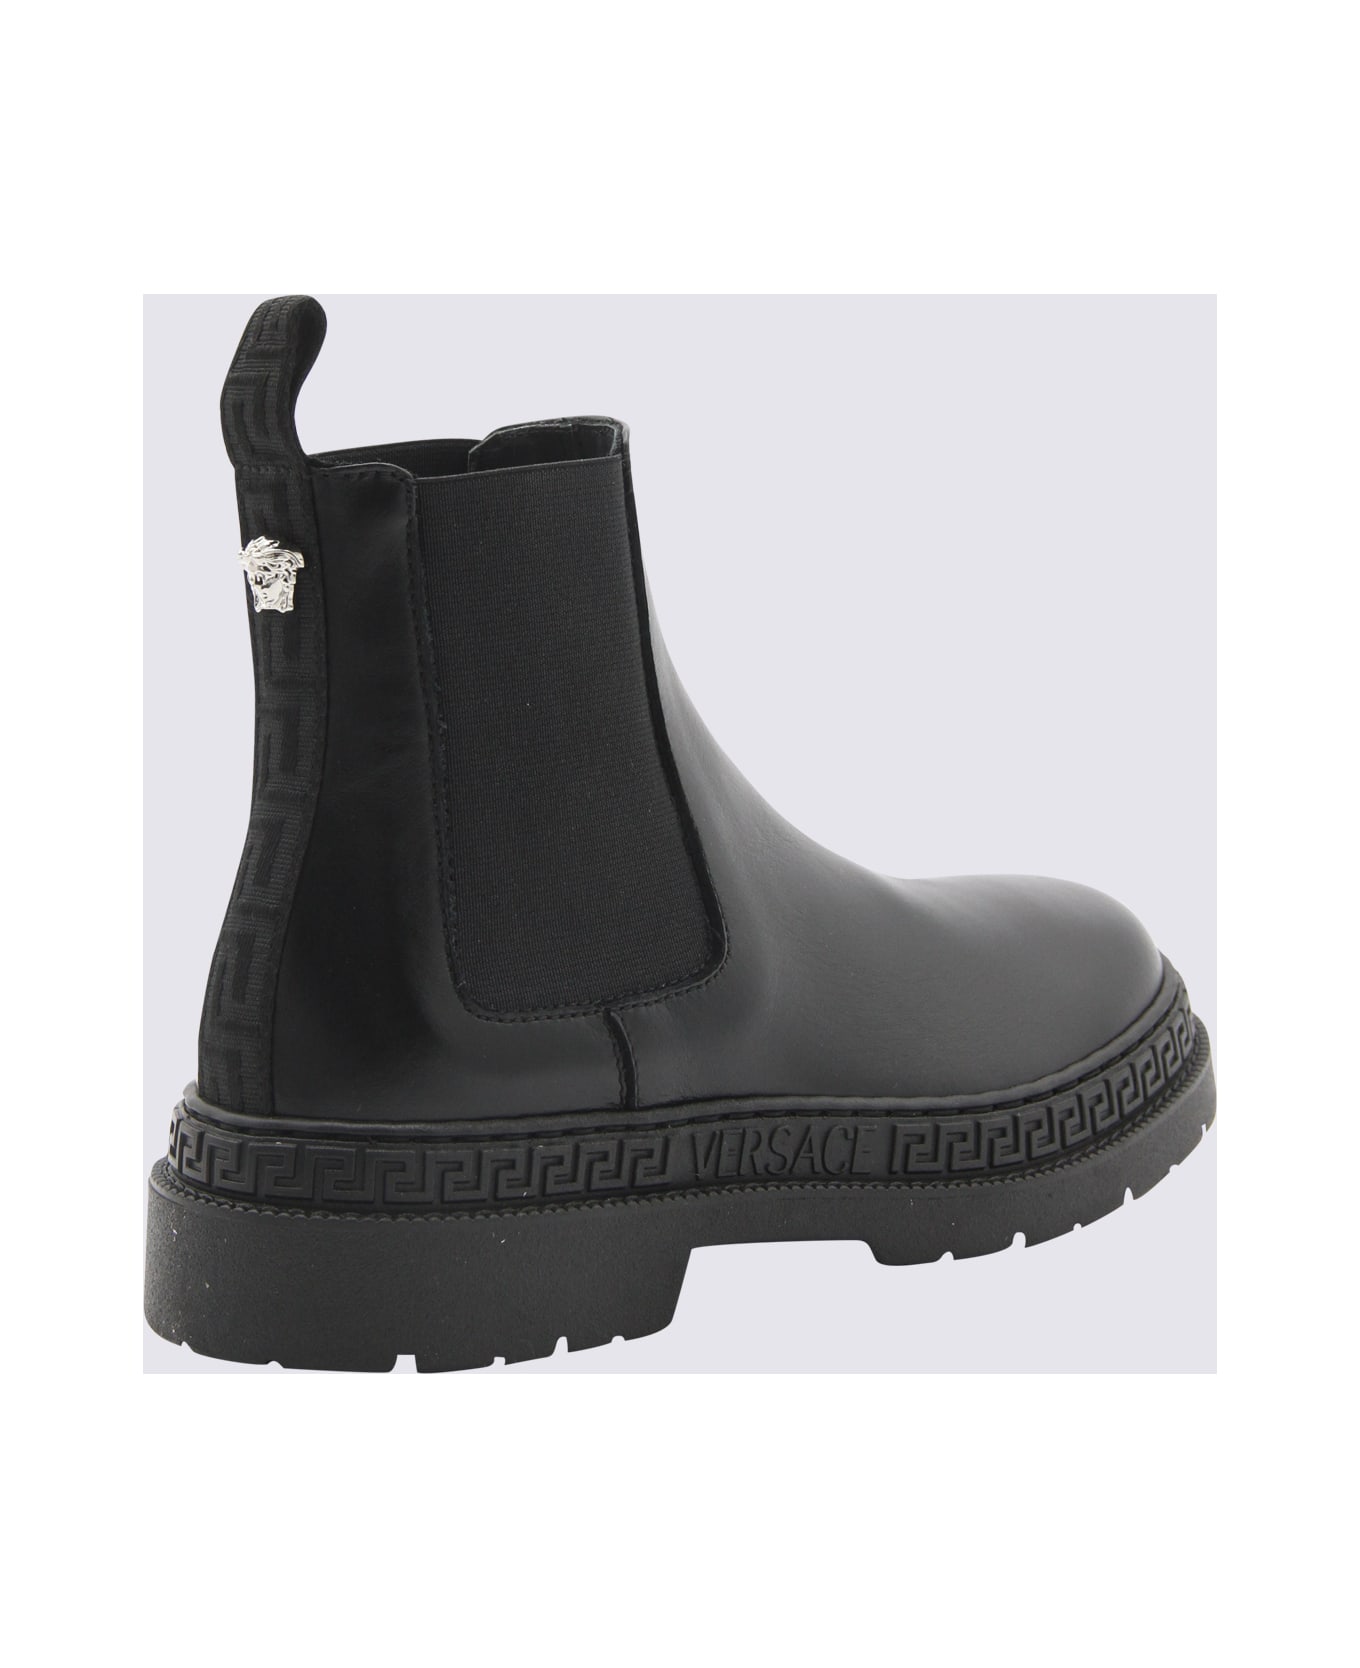 Versace Black Leather Ankle Boots - Black シューズ